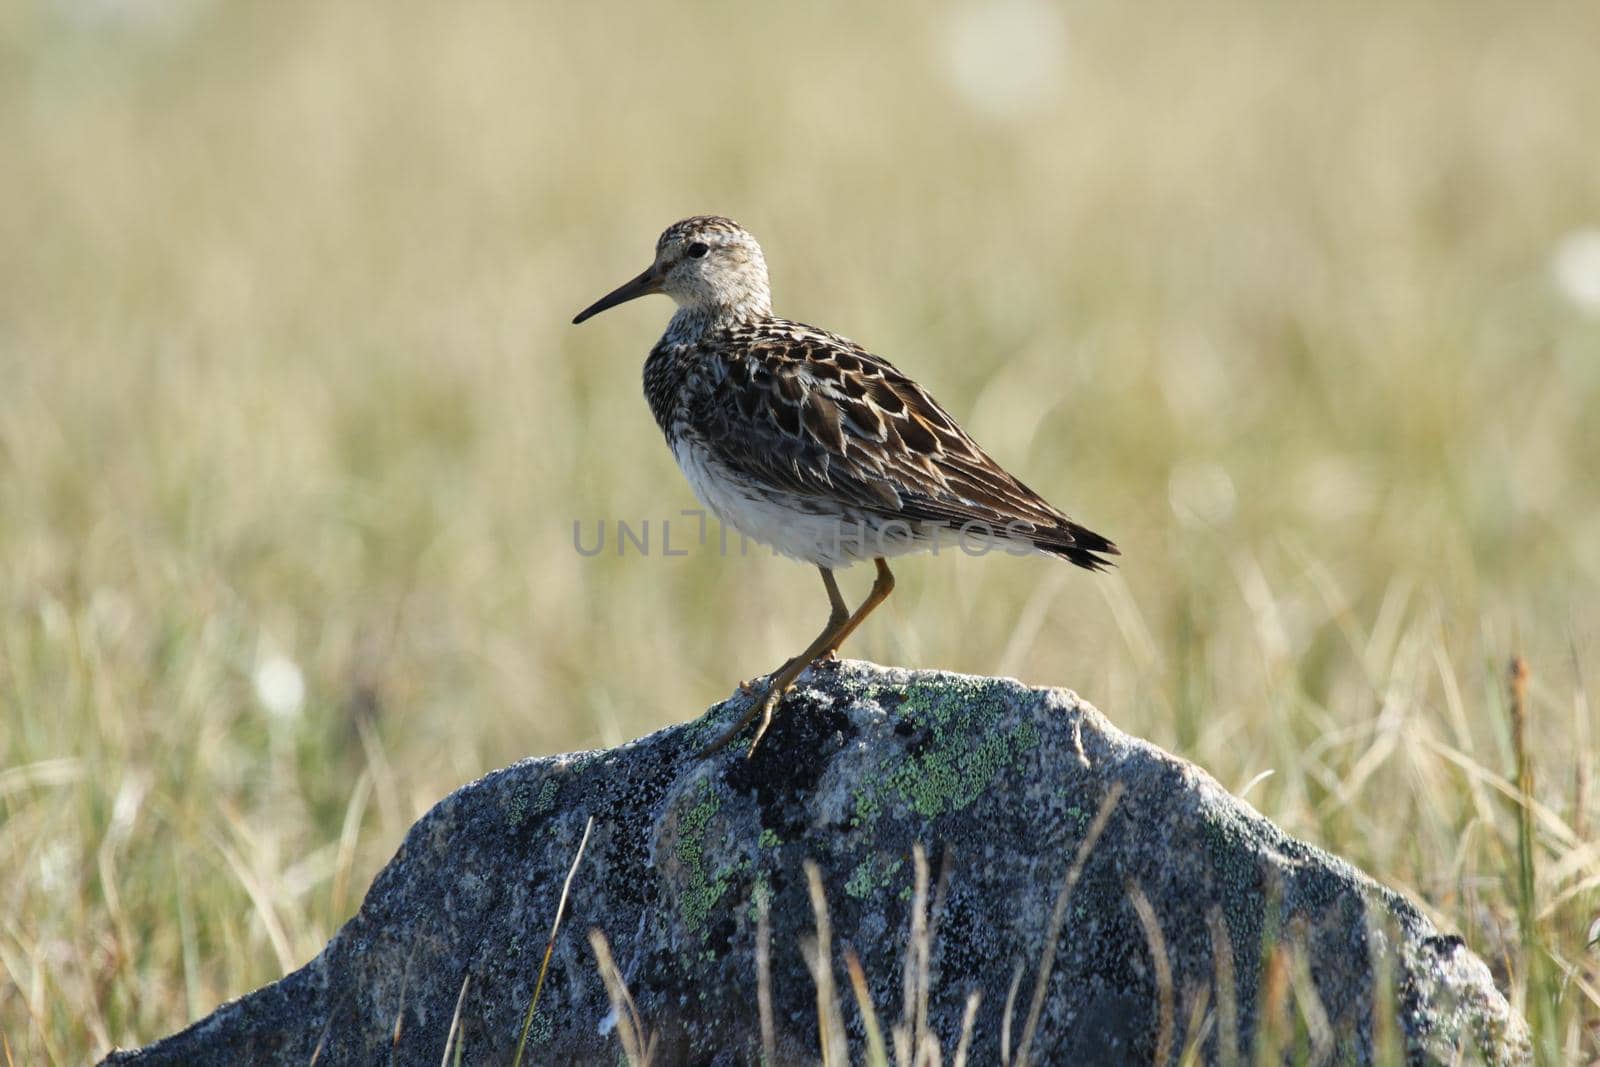 Pectoral sandpiper, Calidris melanotos, standing on a rock with tundra grass in the background, near Pond Inlet Nunavut